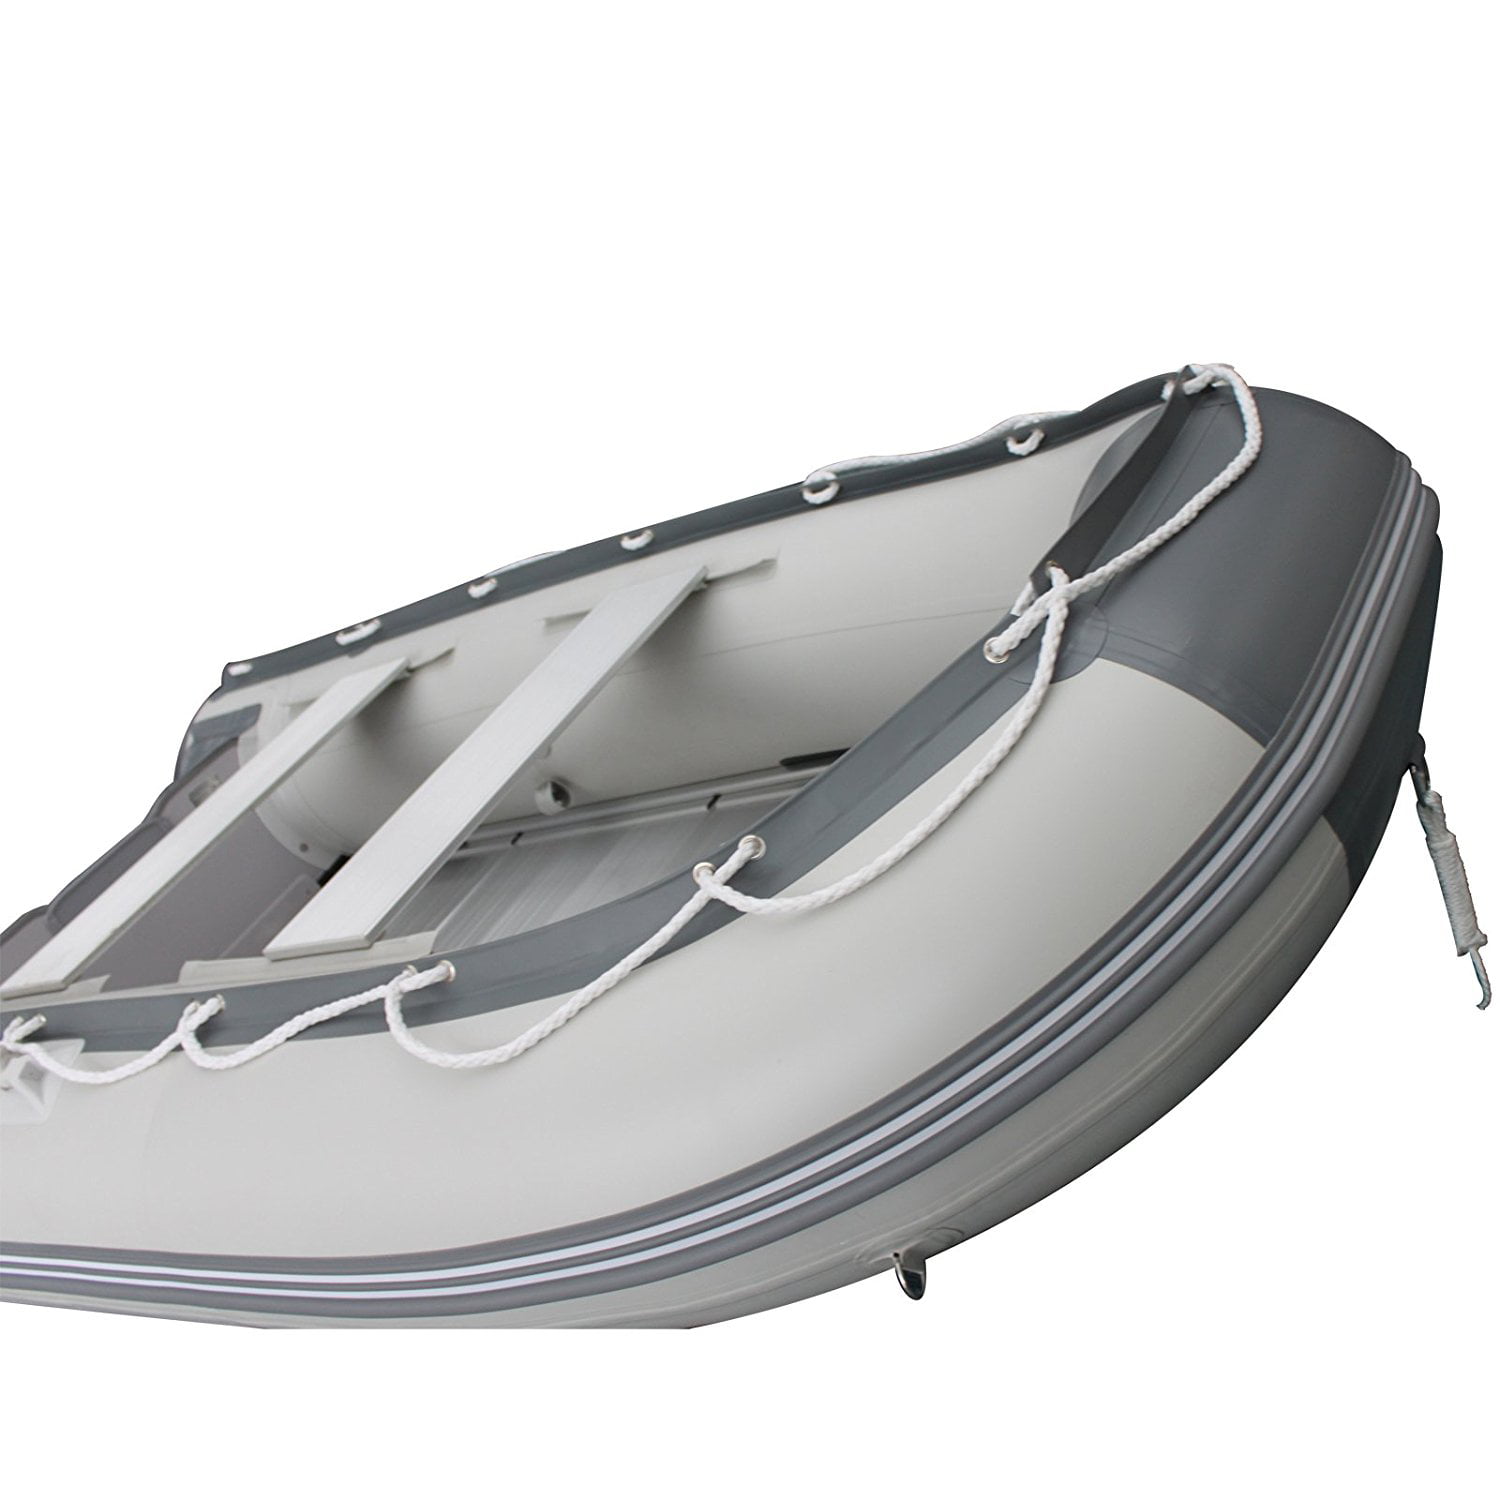 Boatify 10.8 ft Inflatable Boat Raft Fishing Dinghy Pontoon Boat with Aluminum Floor-Grey 